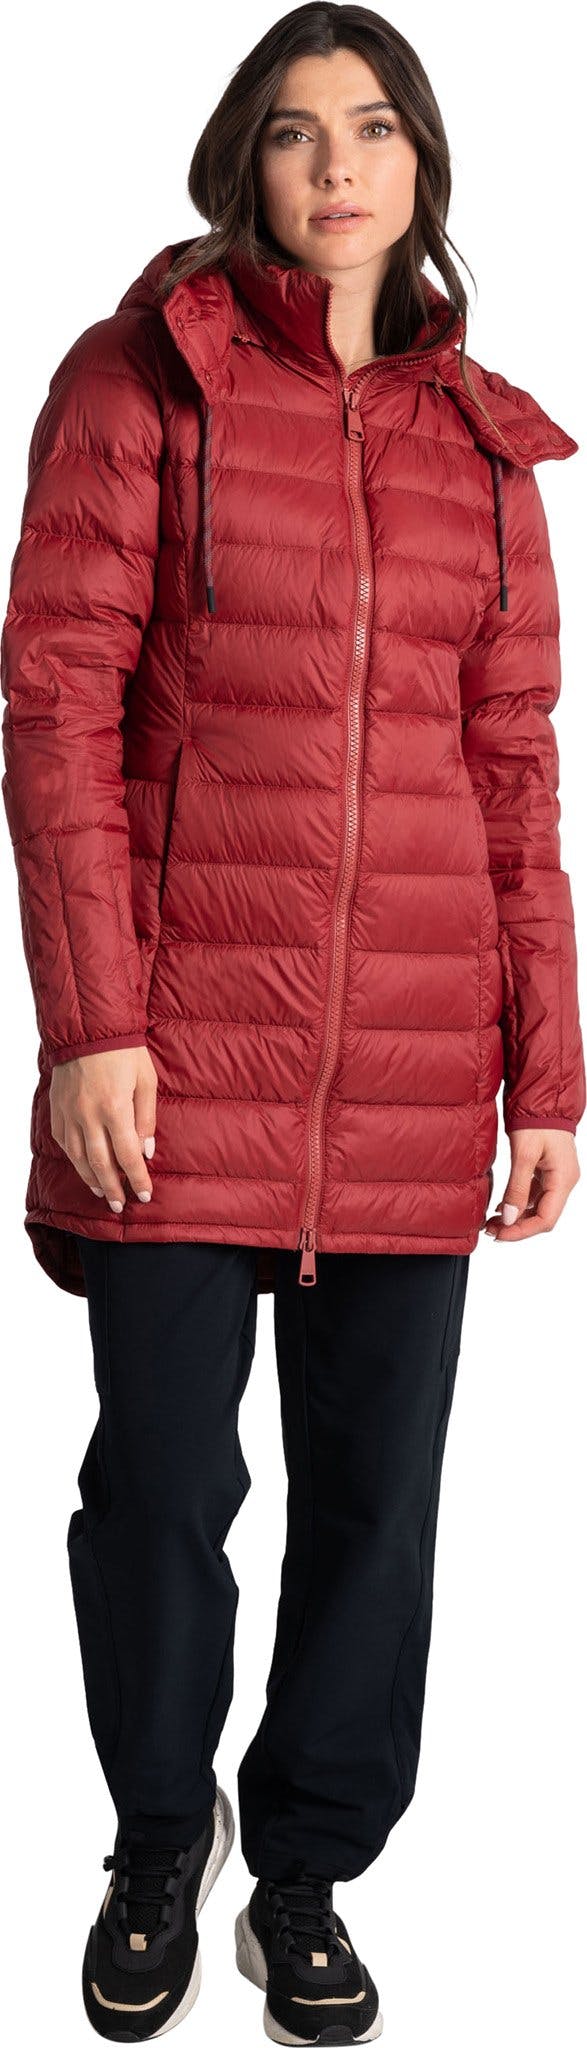 Product image for Claudia Down Jacket - Women's